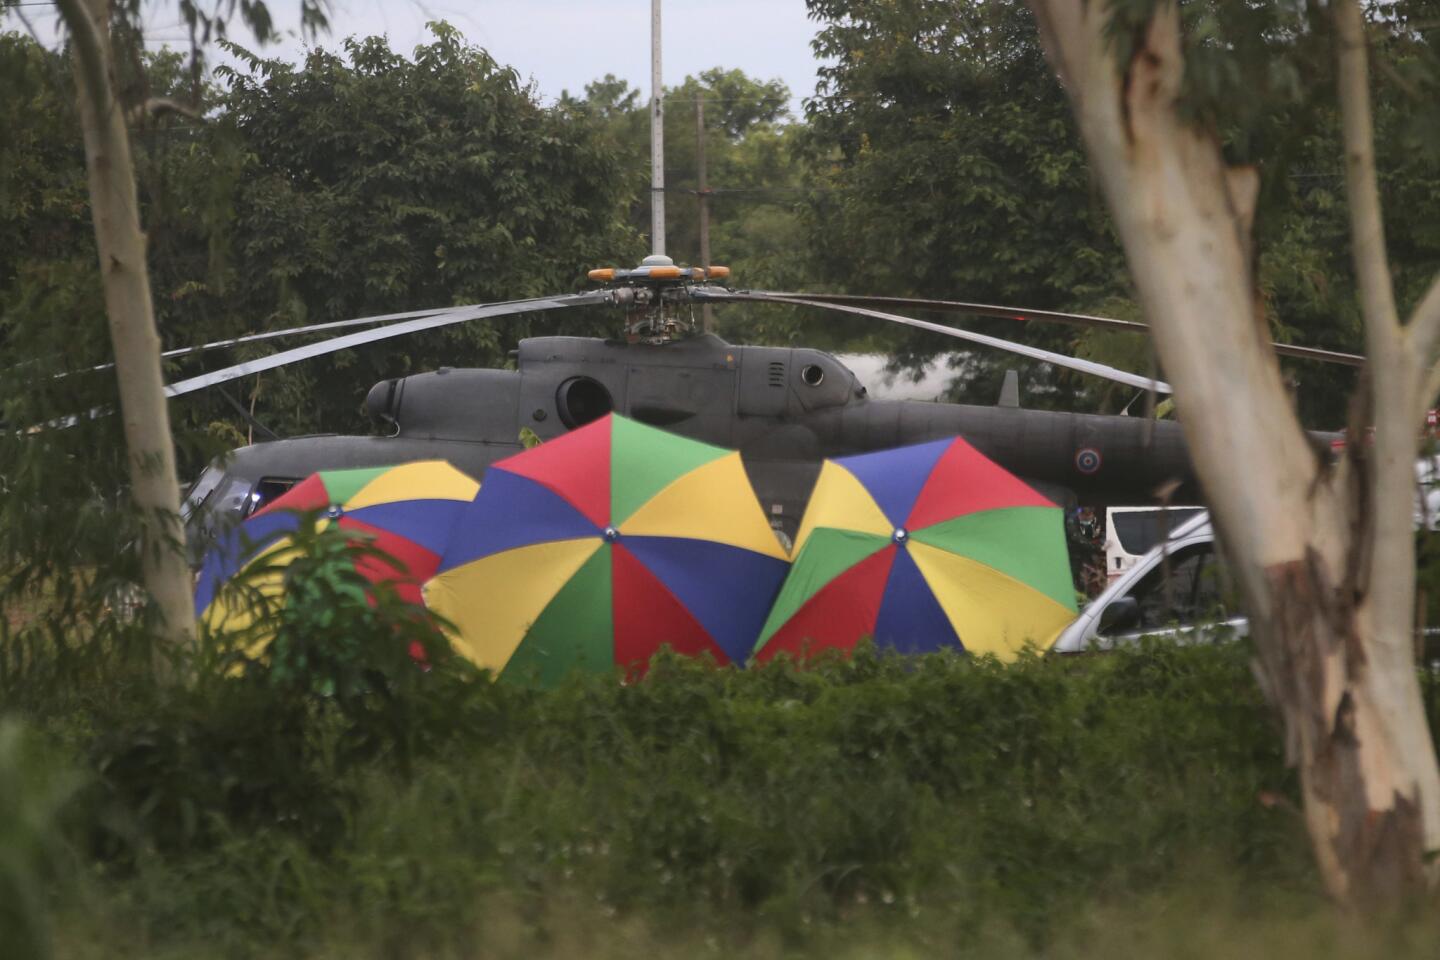 Police place umbrellas around an evacuation helicopter after the last of the trapped boys and their coach were extracted from a cave in Mae Sai, Thailand on July 10.